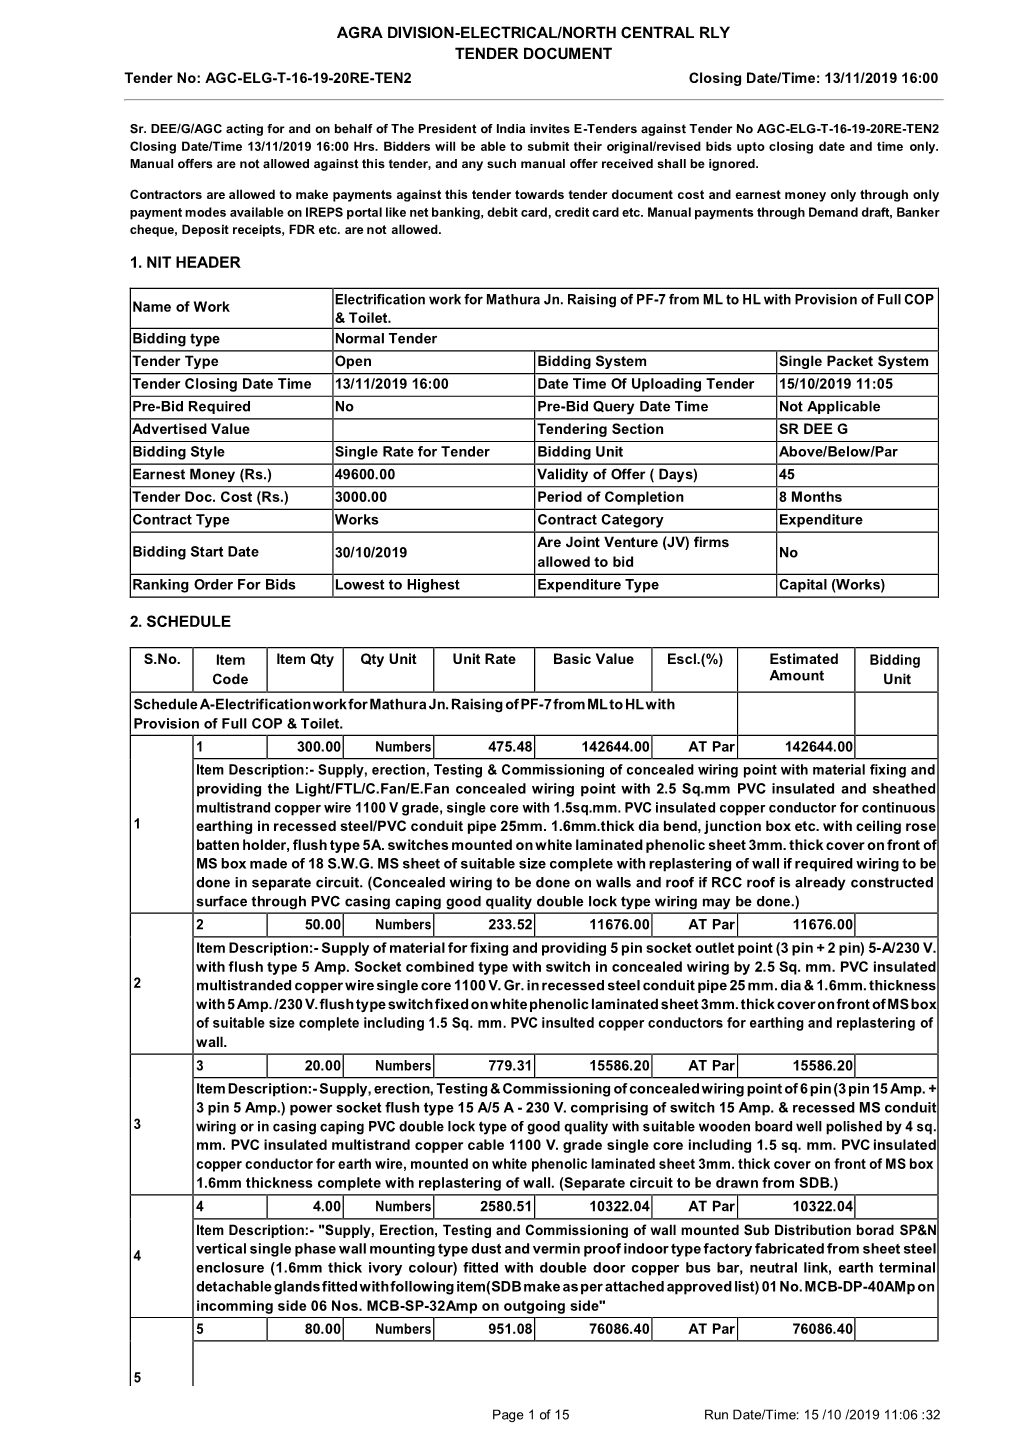 AGRA DIVISION-ELECTRICAL/NORTH CENTRAL RLY TENDER DOCUMENT Tender No: AGC-ELG-T-16-19-20RE-TEN2 Closing Date/Time: 13/11/2019 16:00